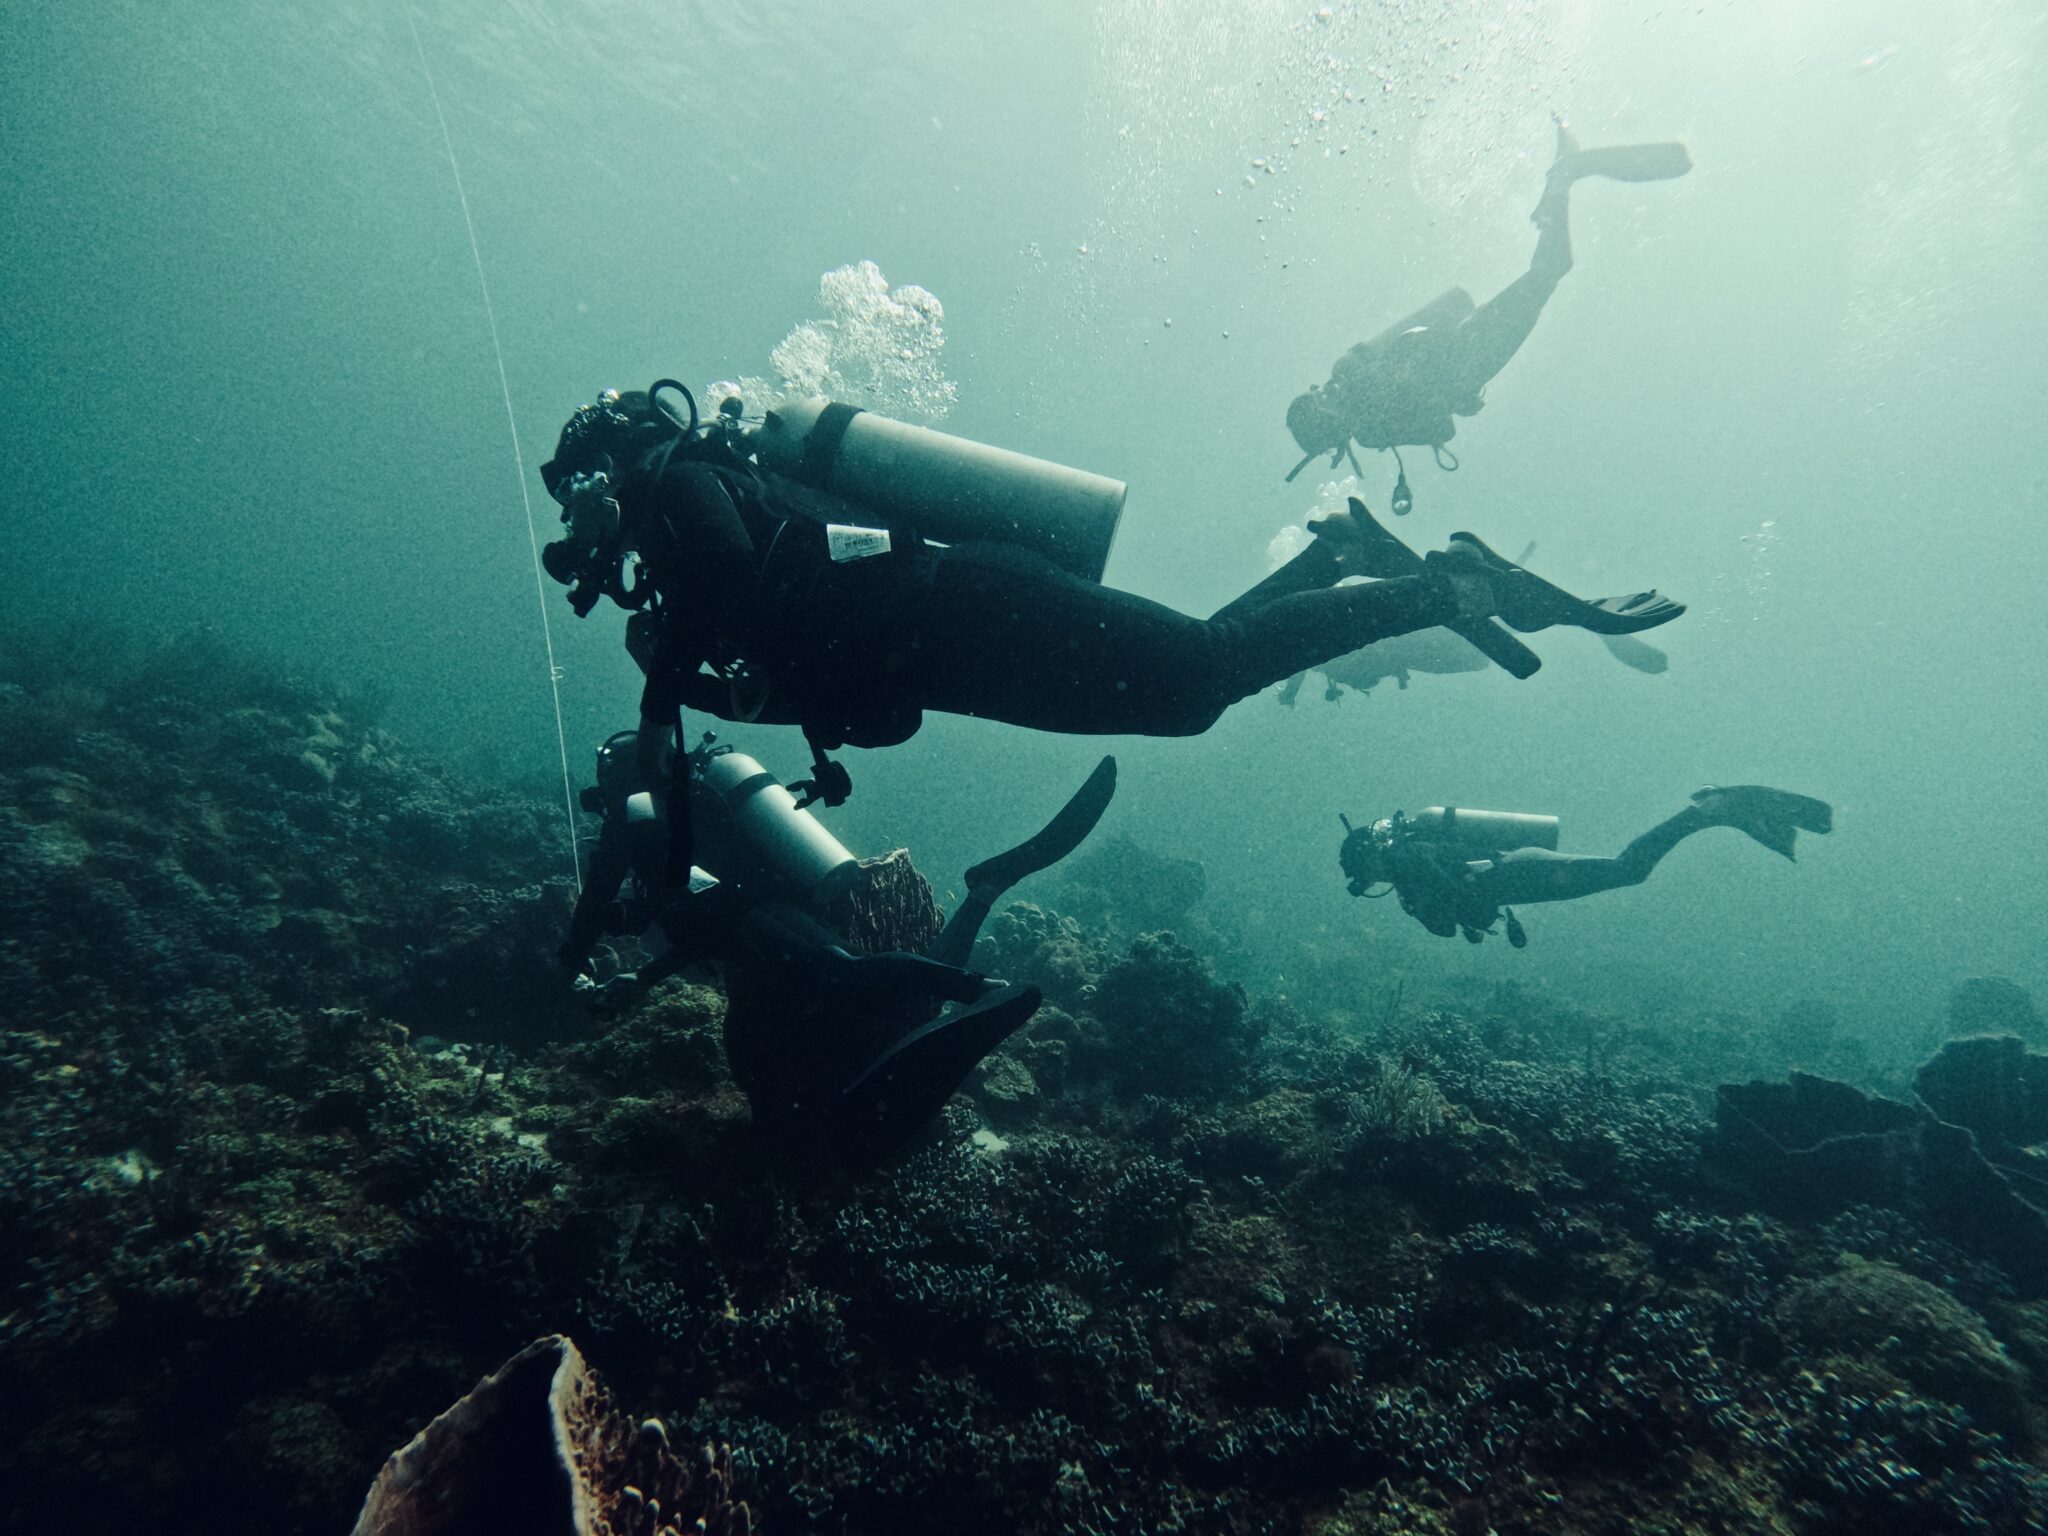 A group of divers explore the underwater world in the UK